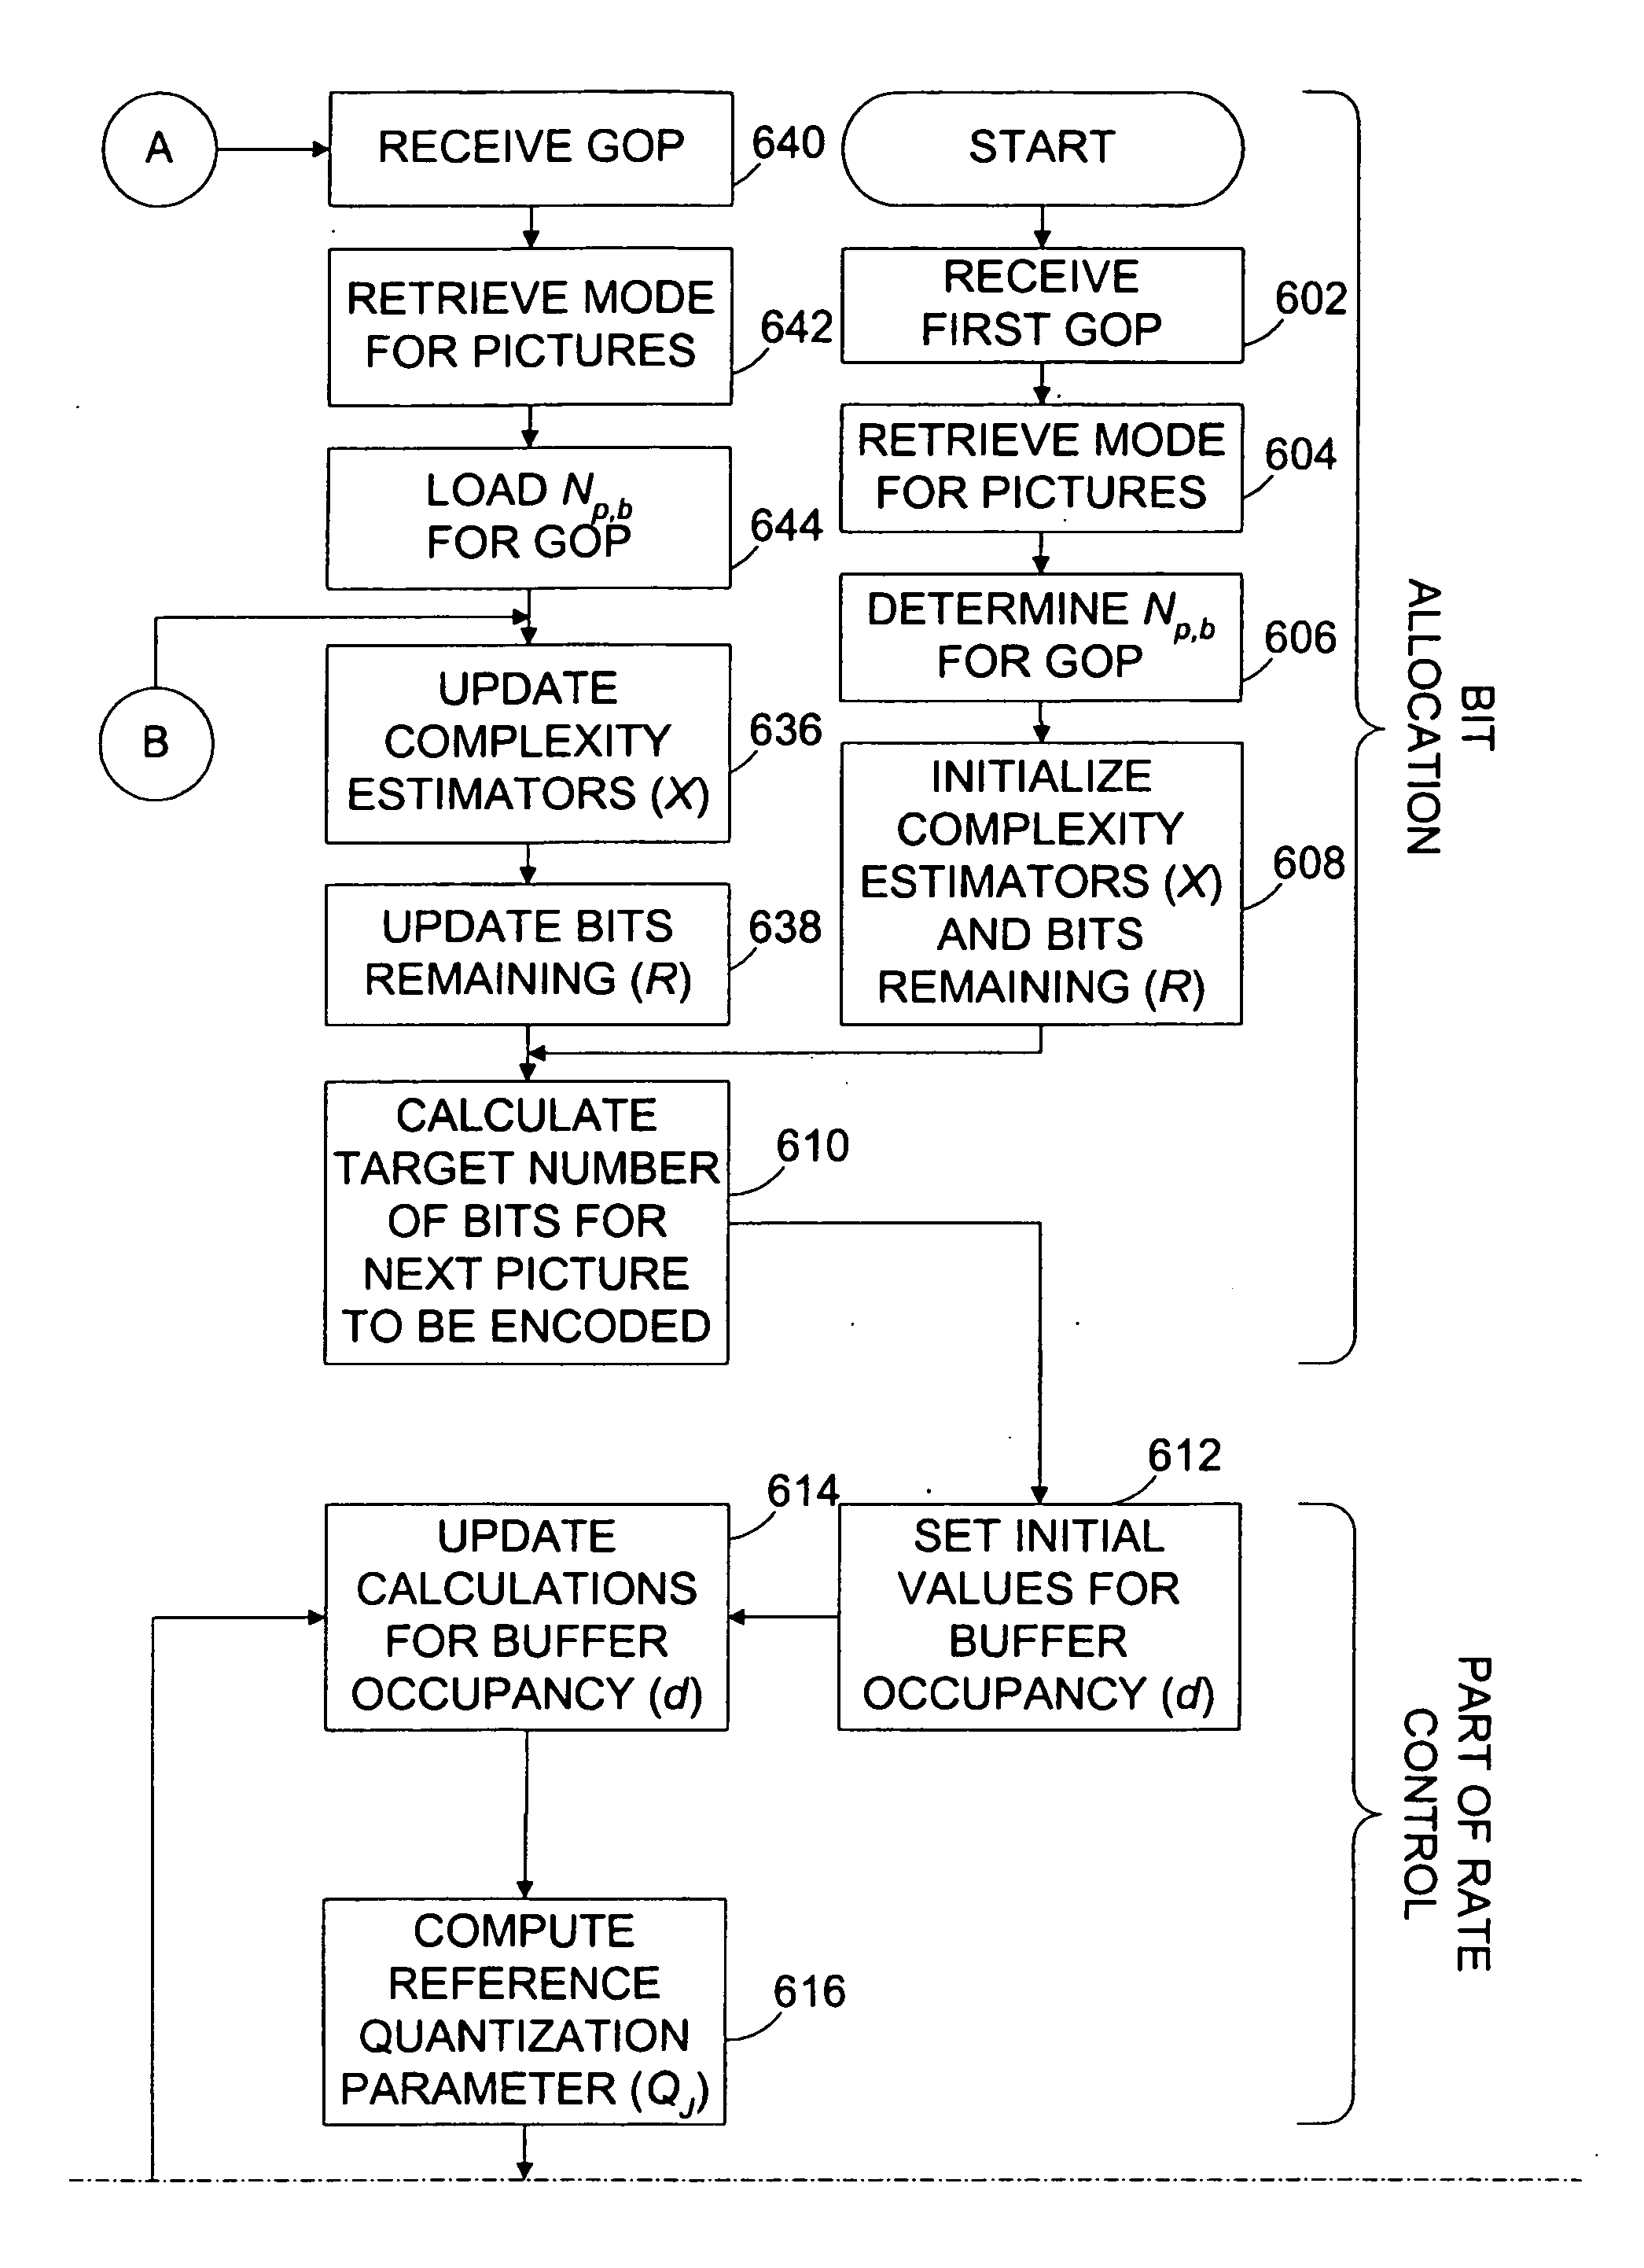 Systems methods for adjusting targeted bit allocation based on an occupancy level of a VBV buffer model